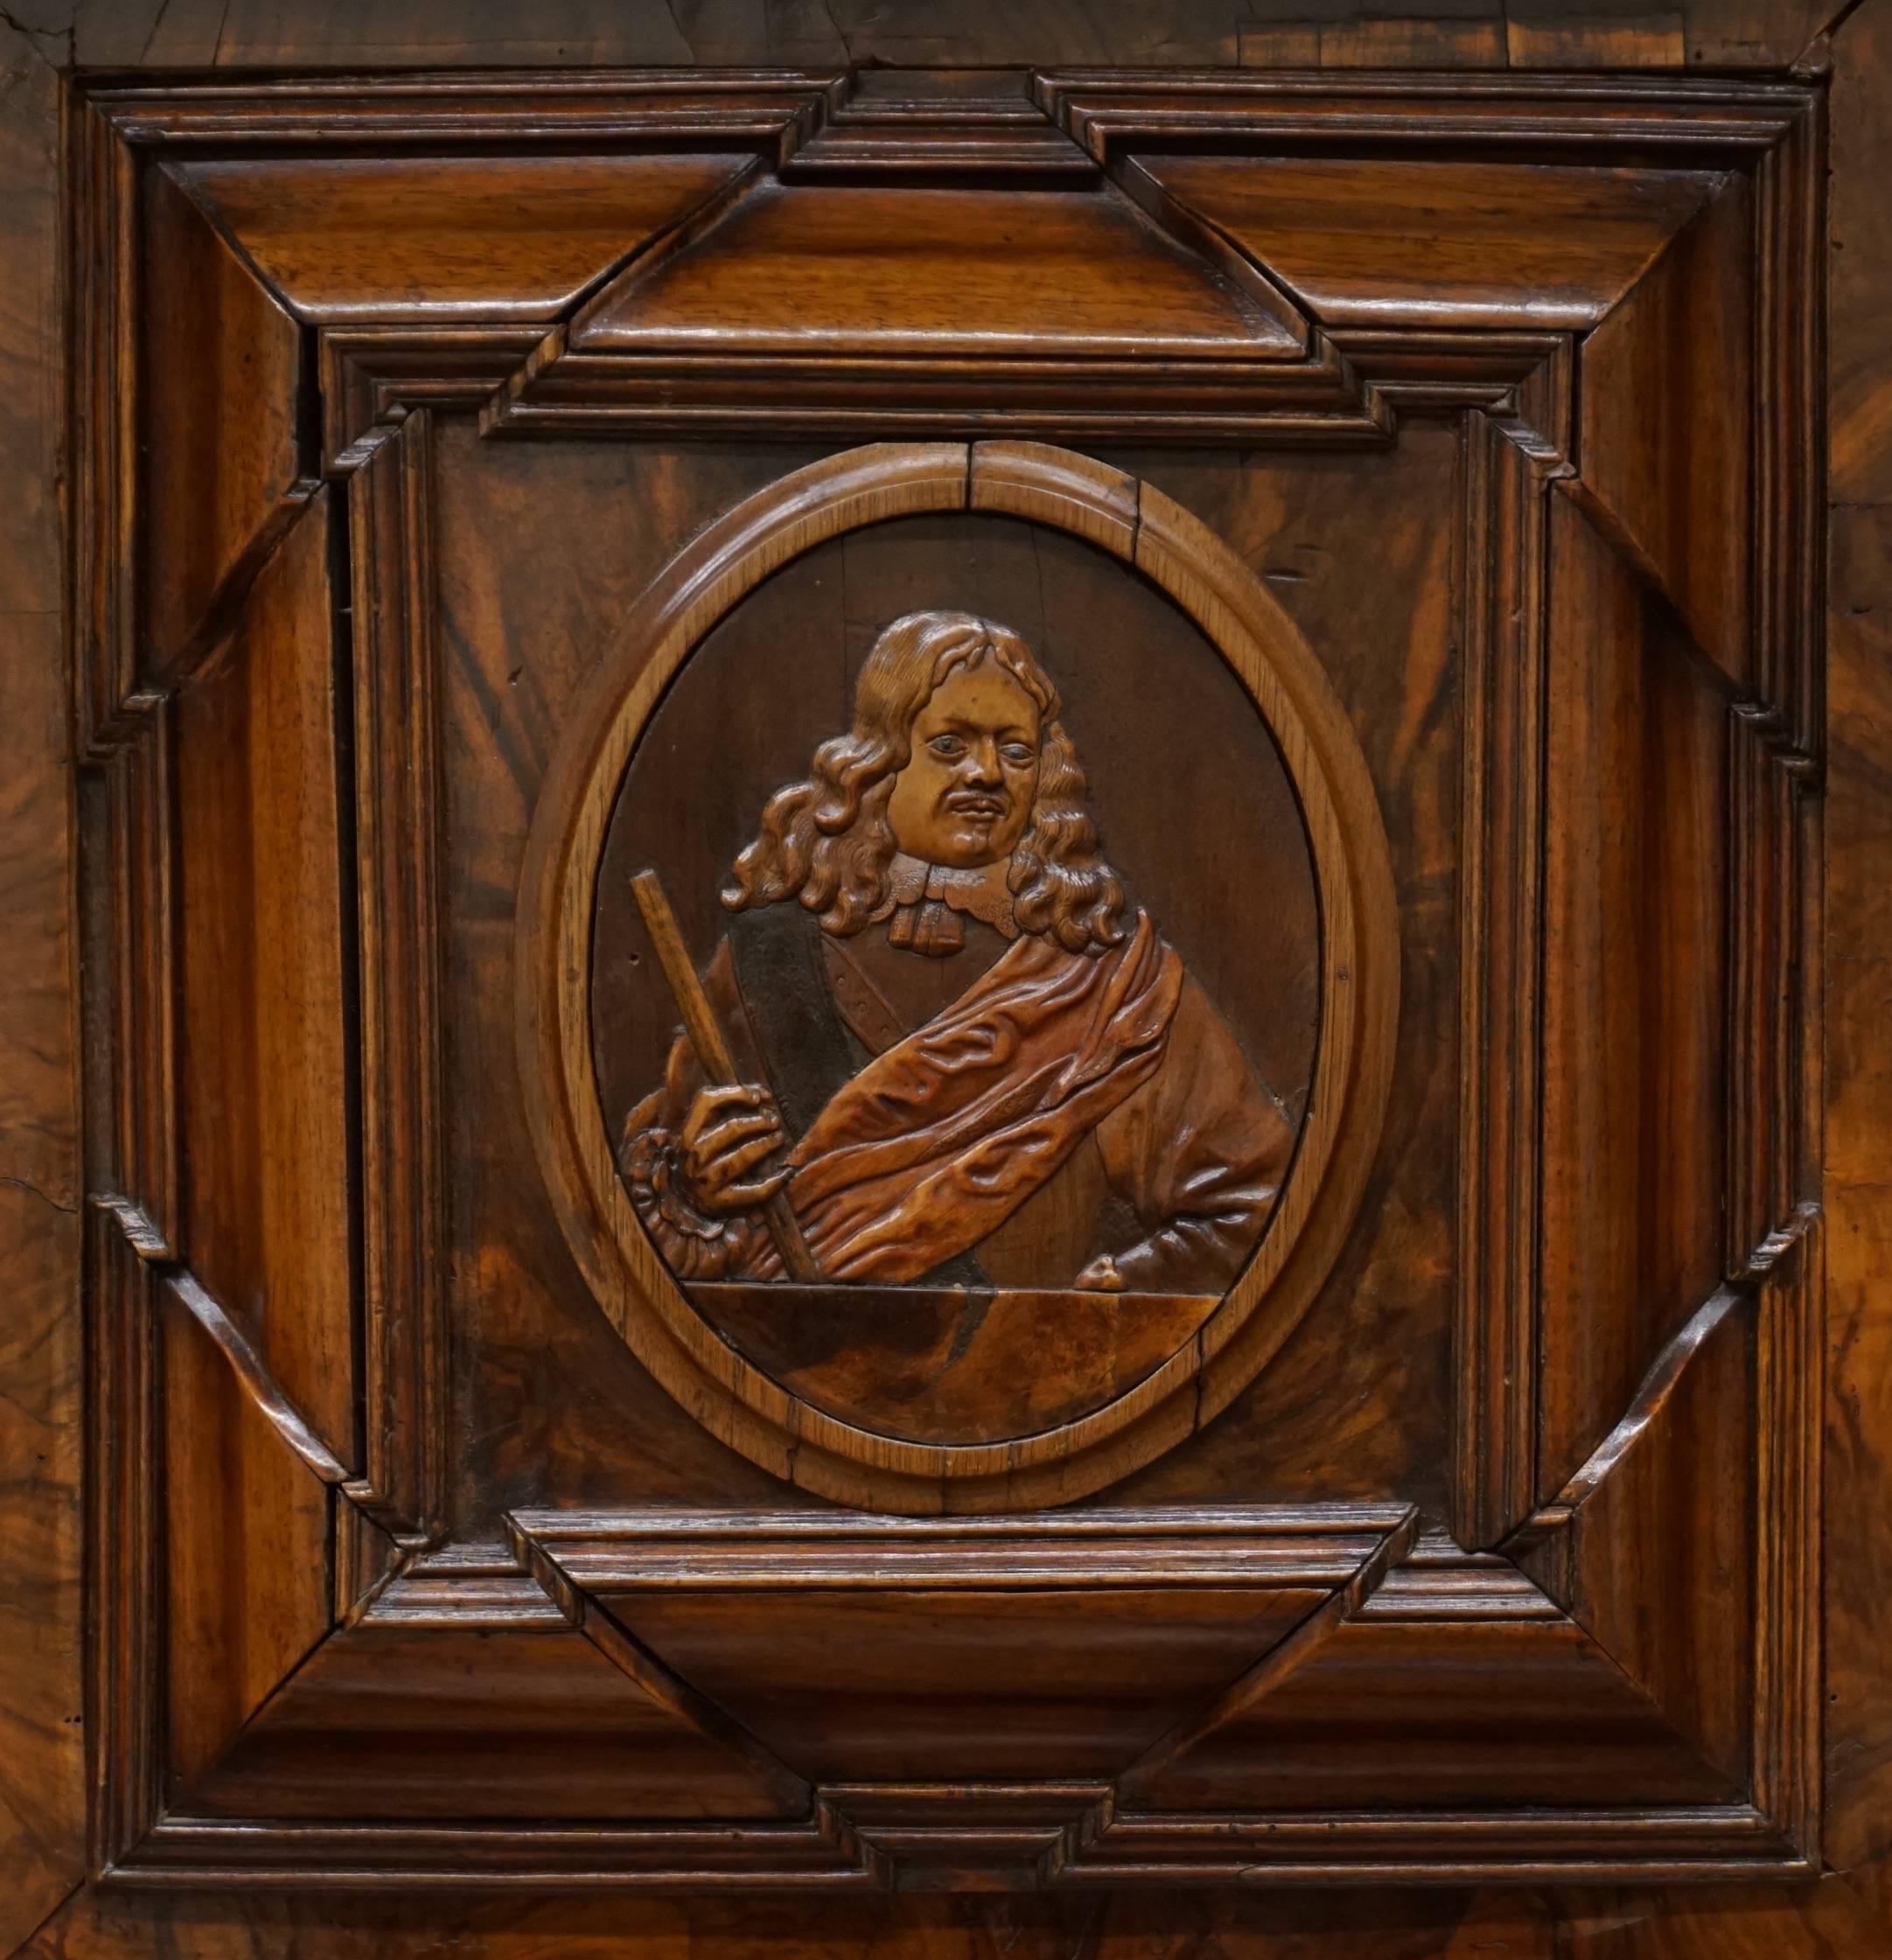 French 17th Century Louis XIII Burl Walnut Sideboard Cabinet with Carved Portrait